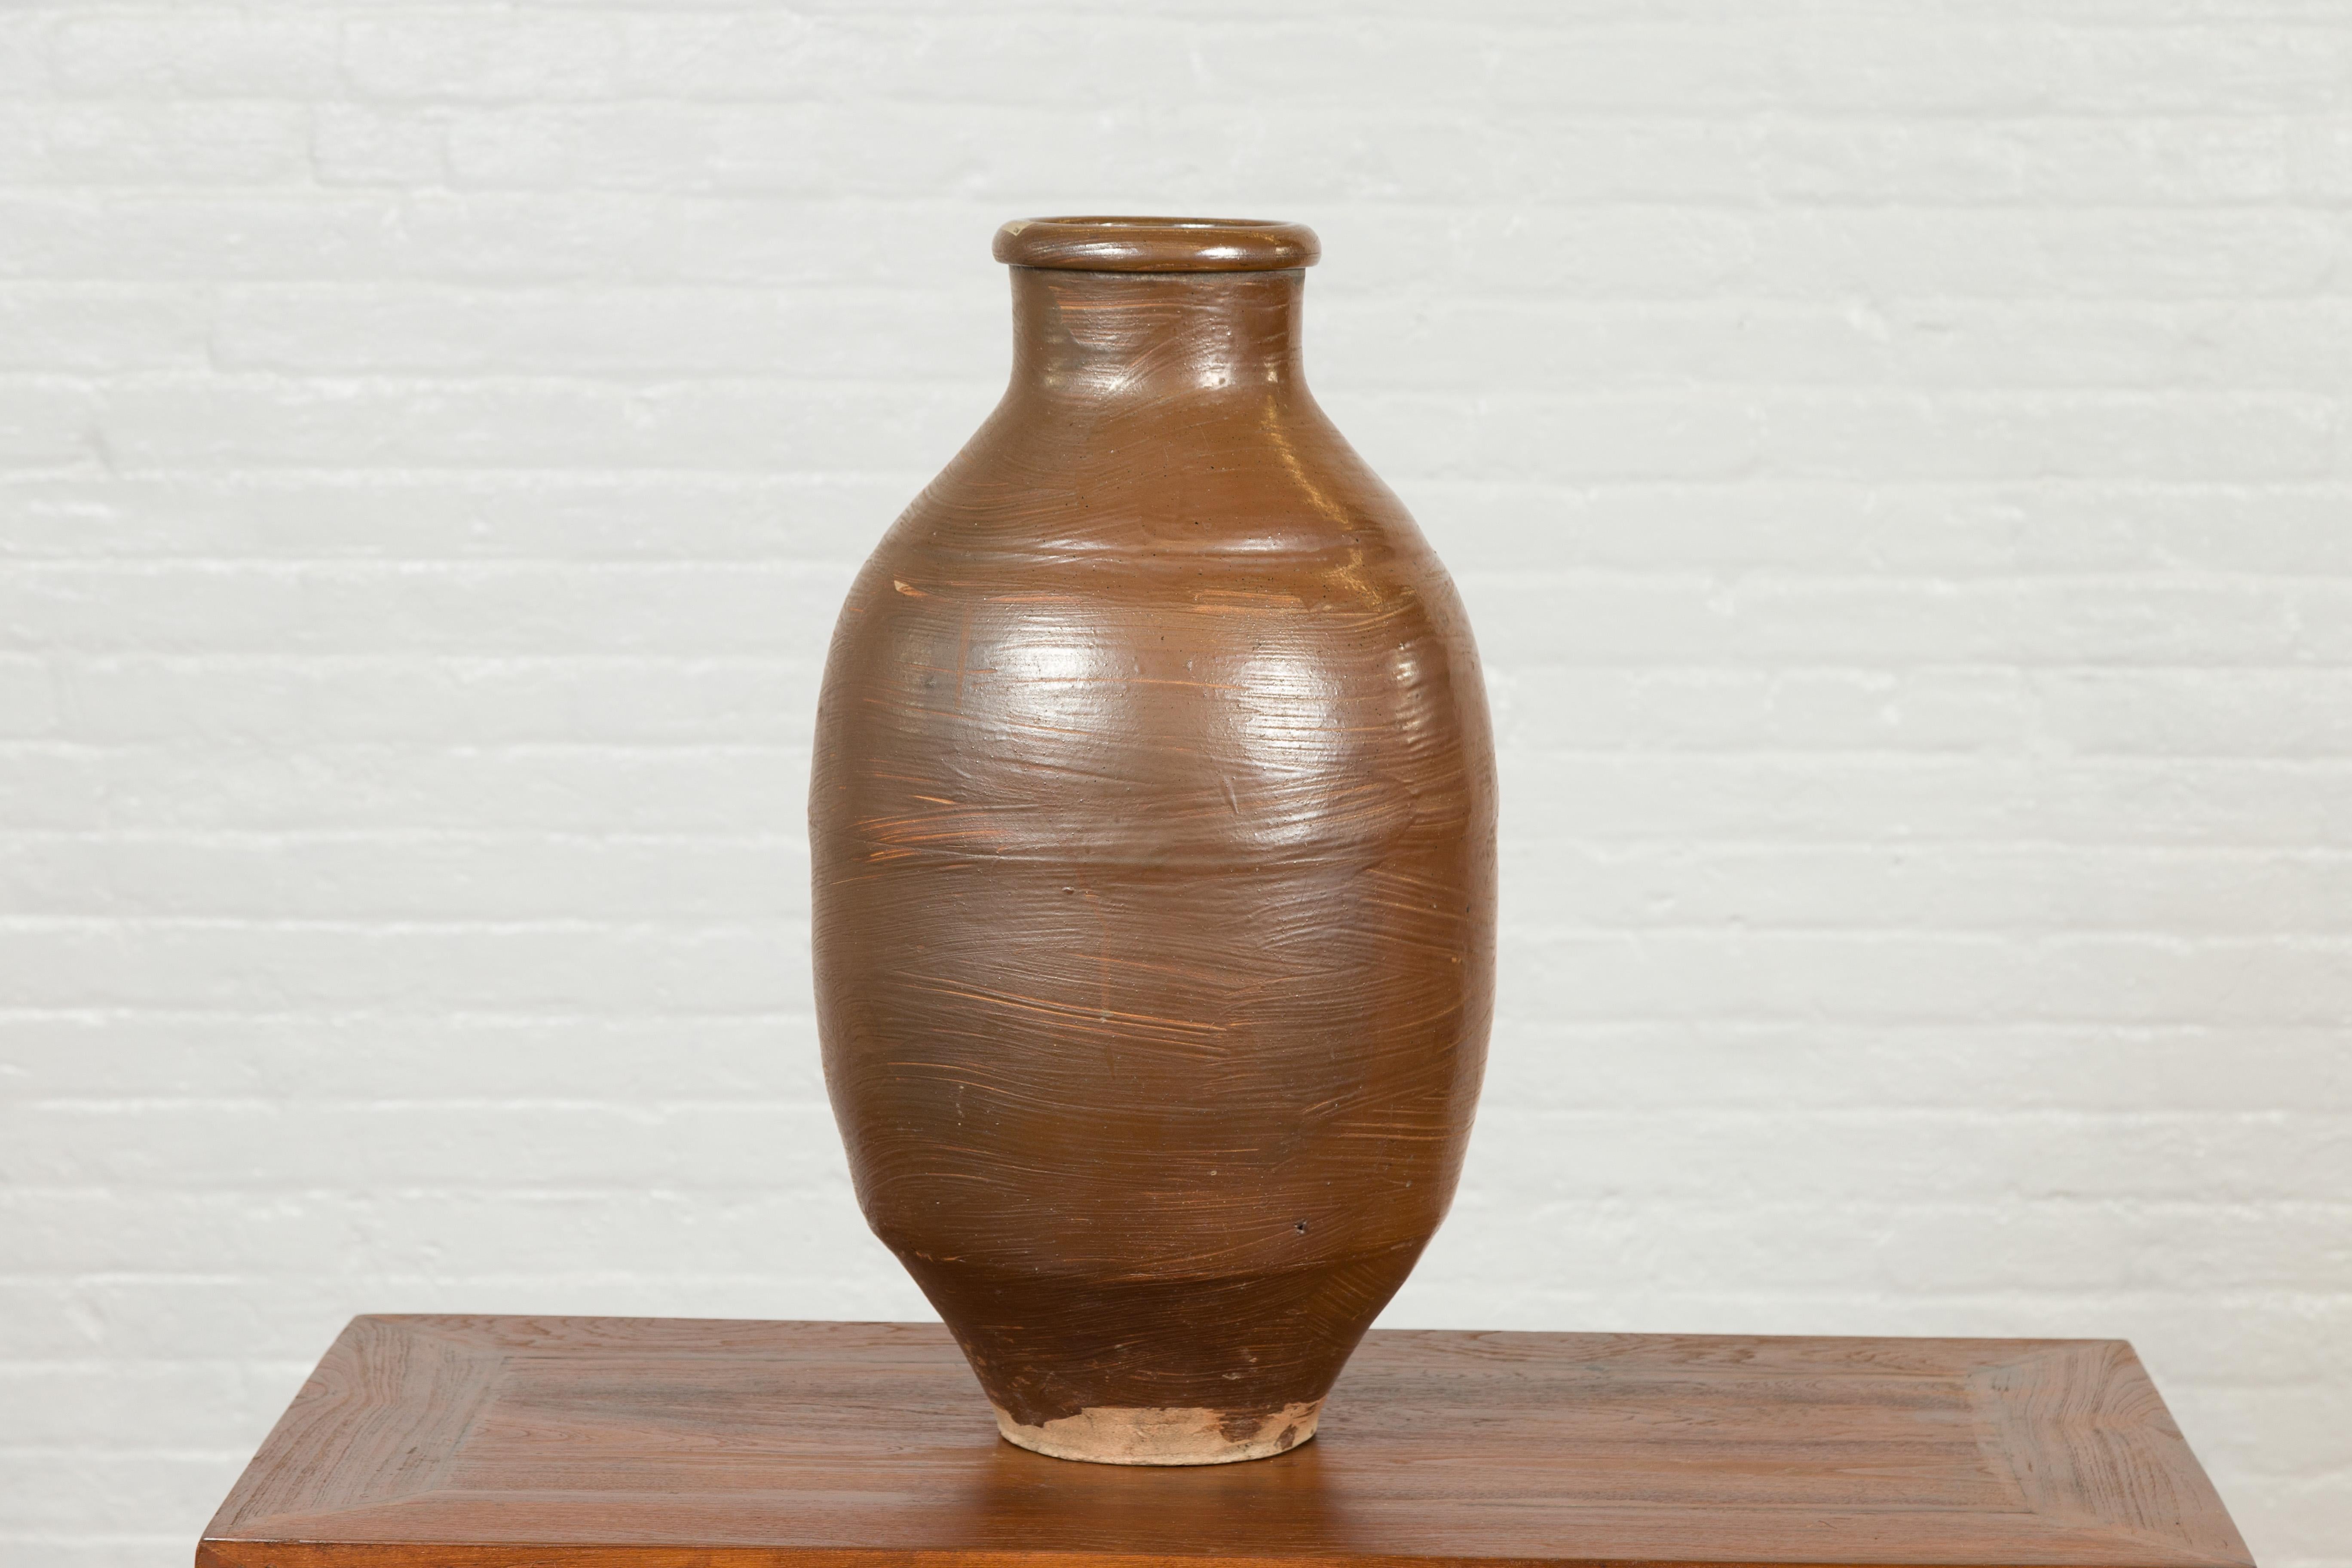 Japanese Meiji Period 19th century Water Jar with Brown Monochrome Patina For Sale 5